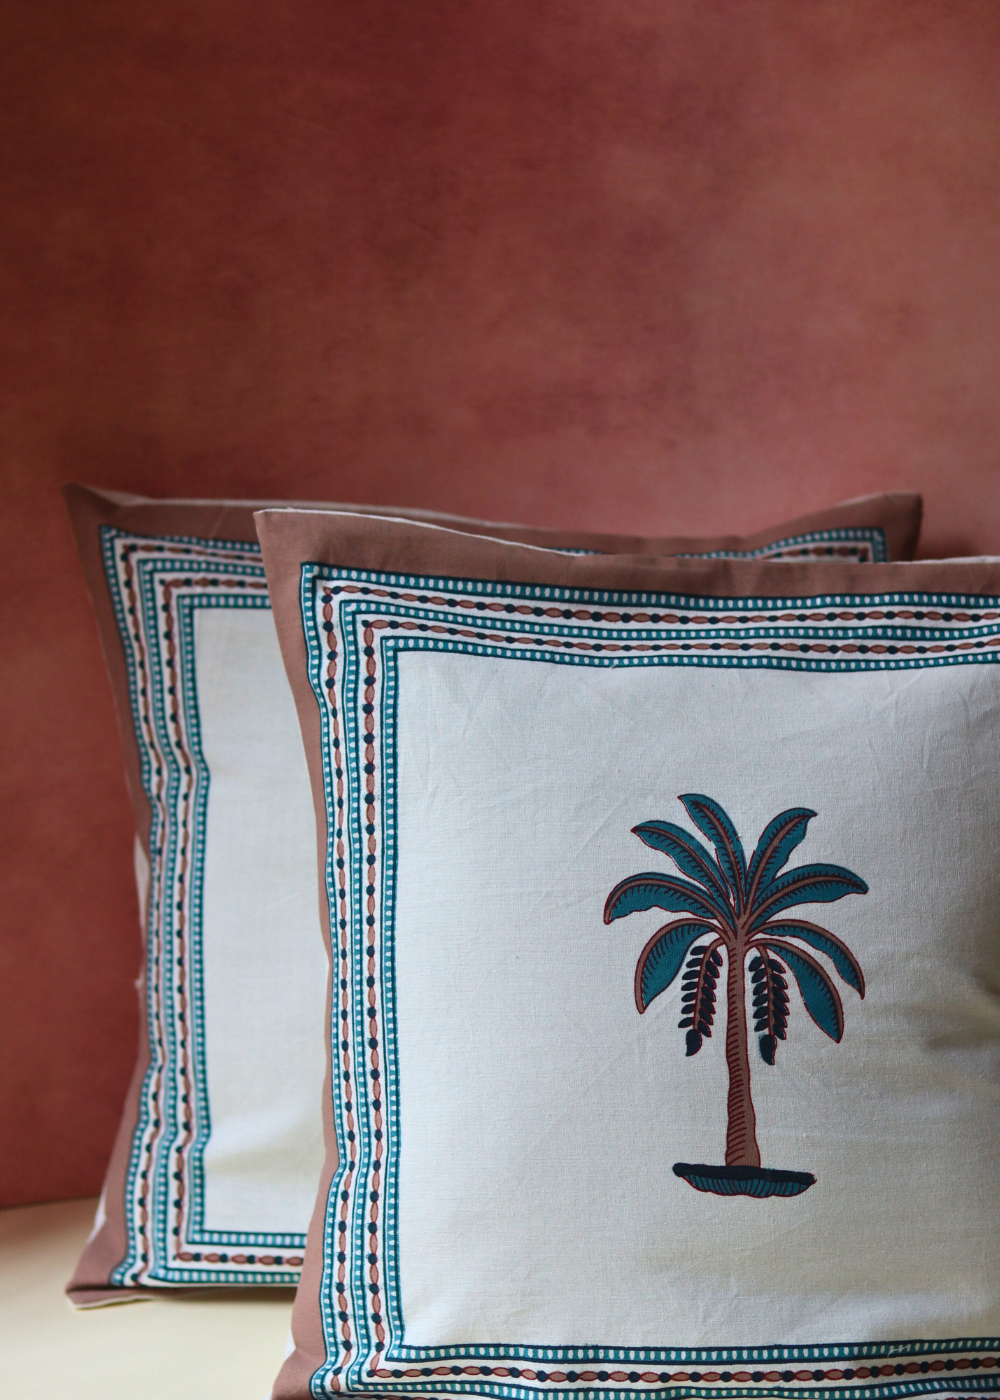 Coco Tree Block Printed Cushion Cover - set of 2